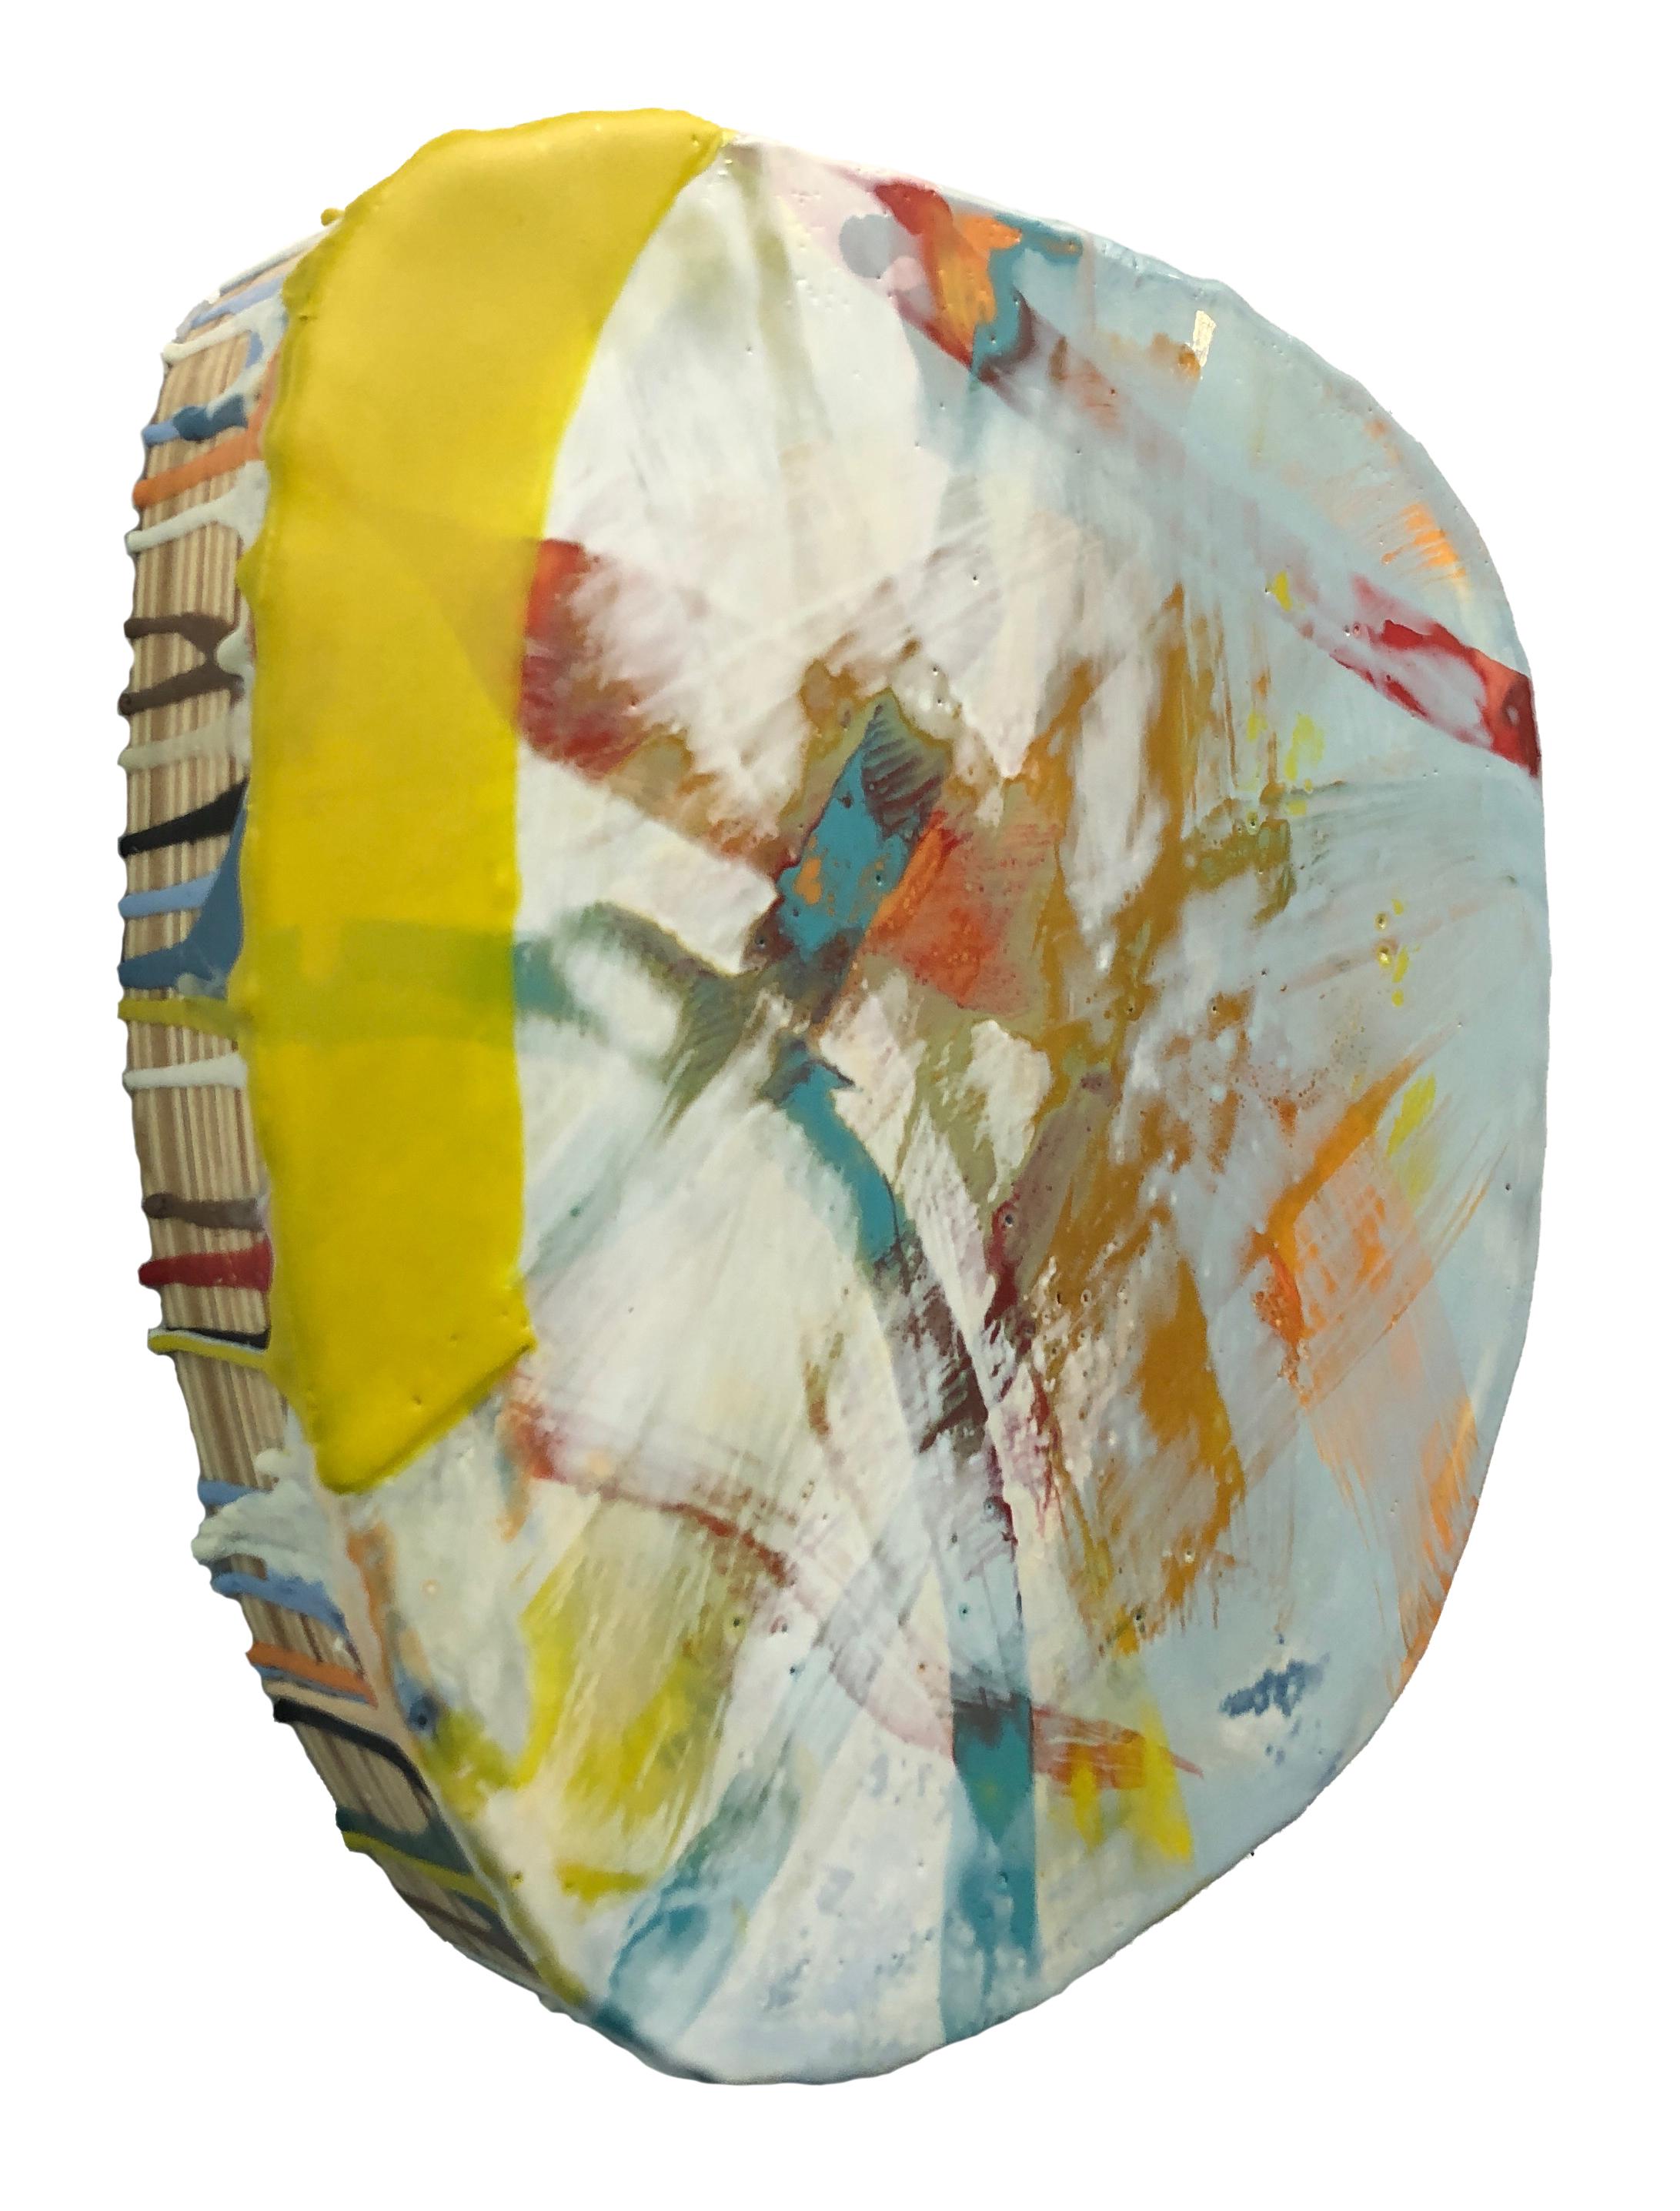 Susan Stover Abstract Sculpture - Bouquet (Abstract Expressionist Wall Sculpture in Pastel Blue, Yellow, Green)